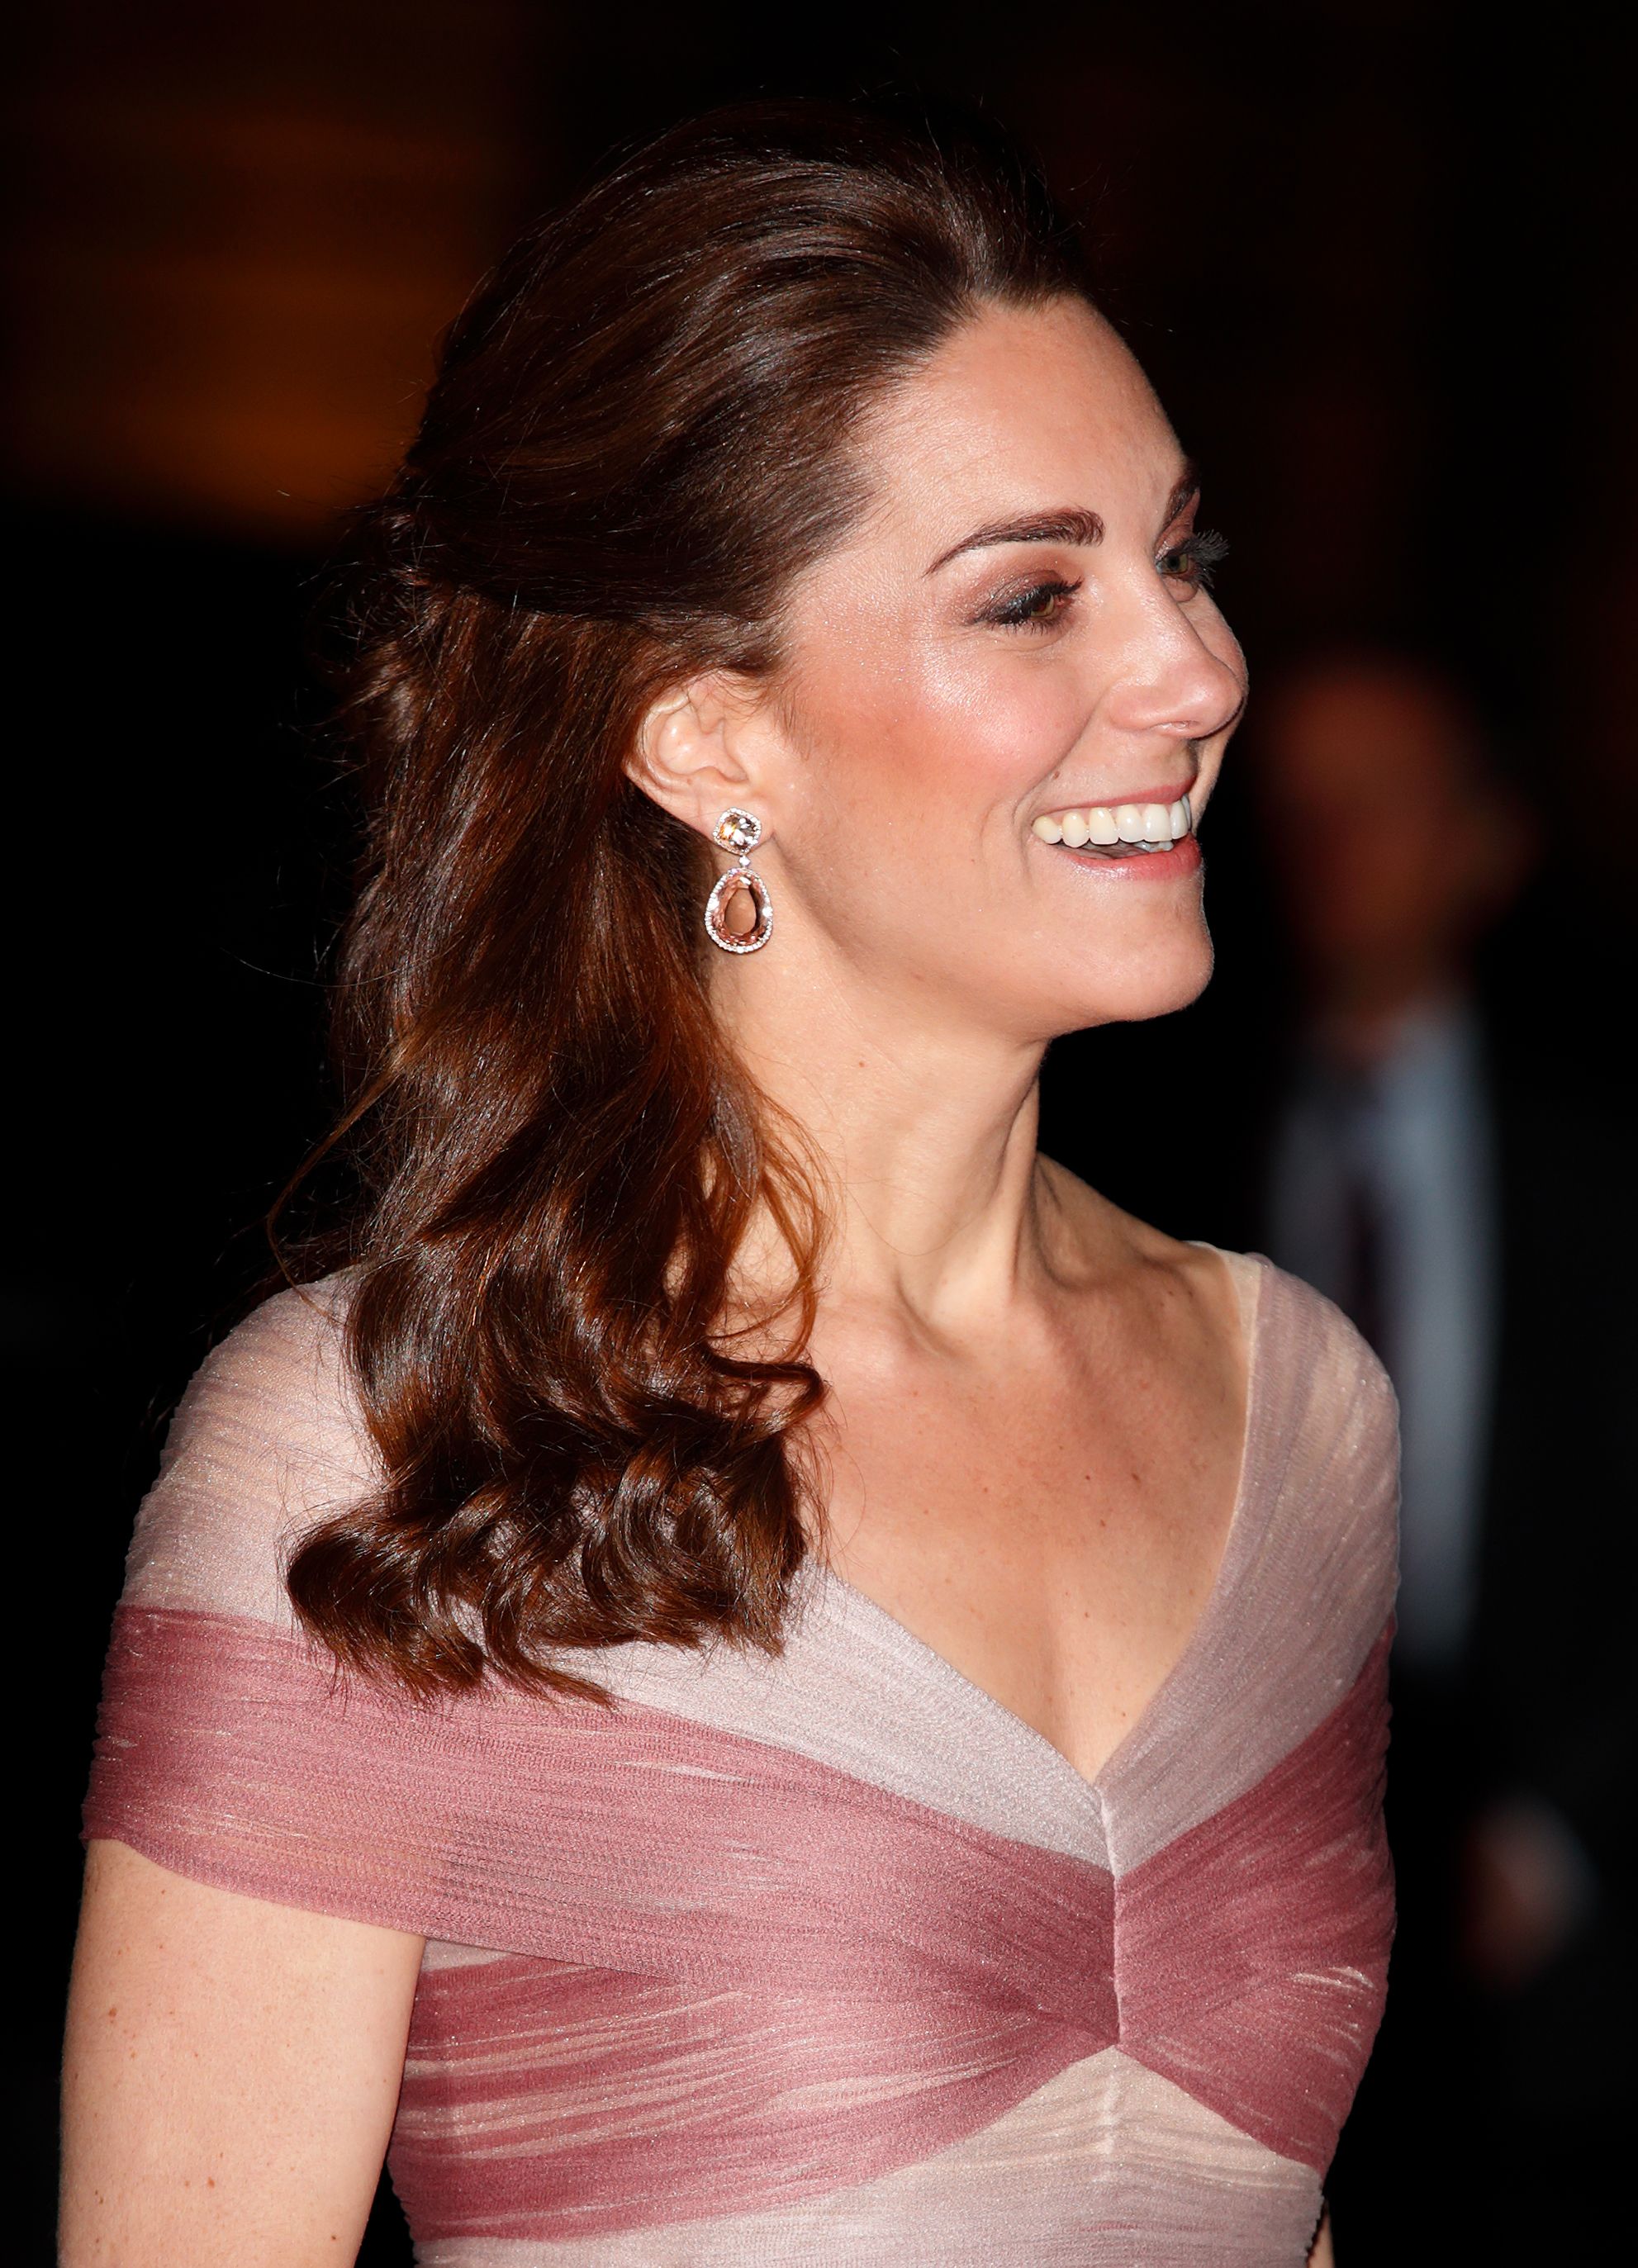 Kate Middleton Wore a Gorgeous Rose-Colored Gucci Gown to the 100